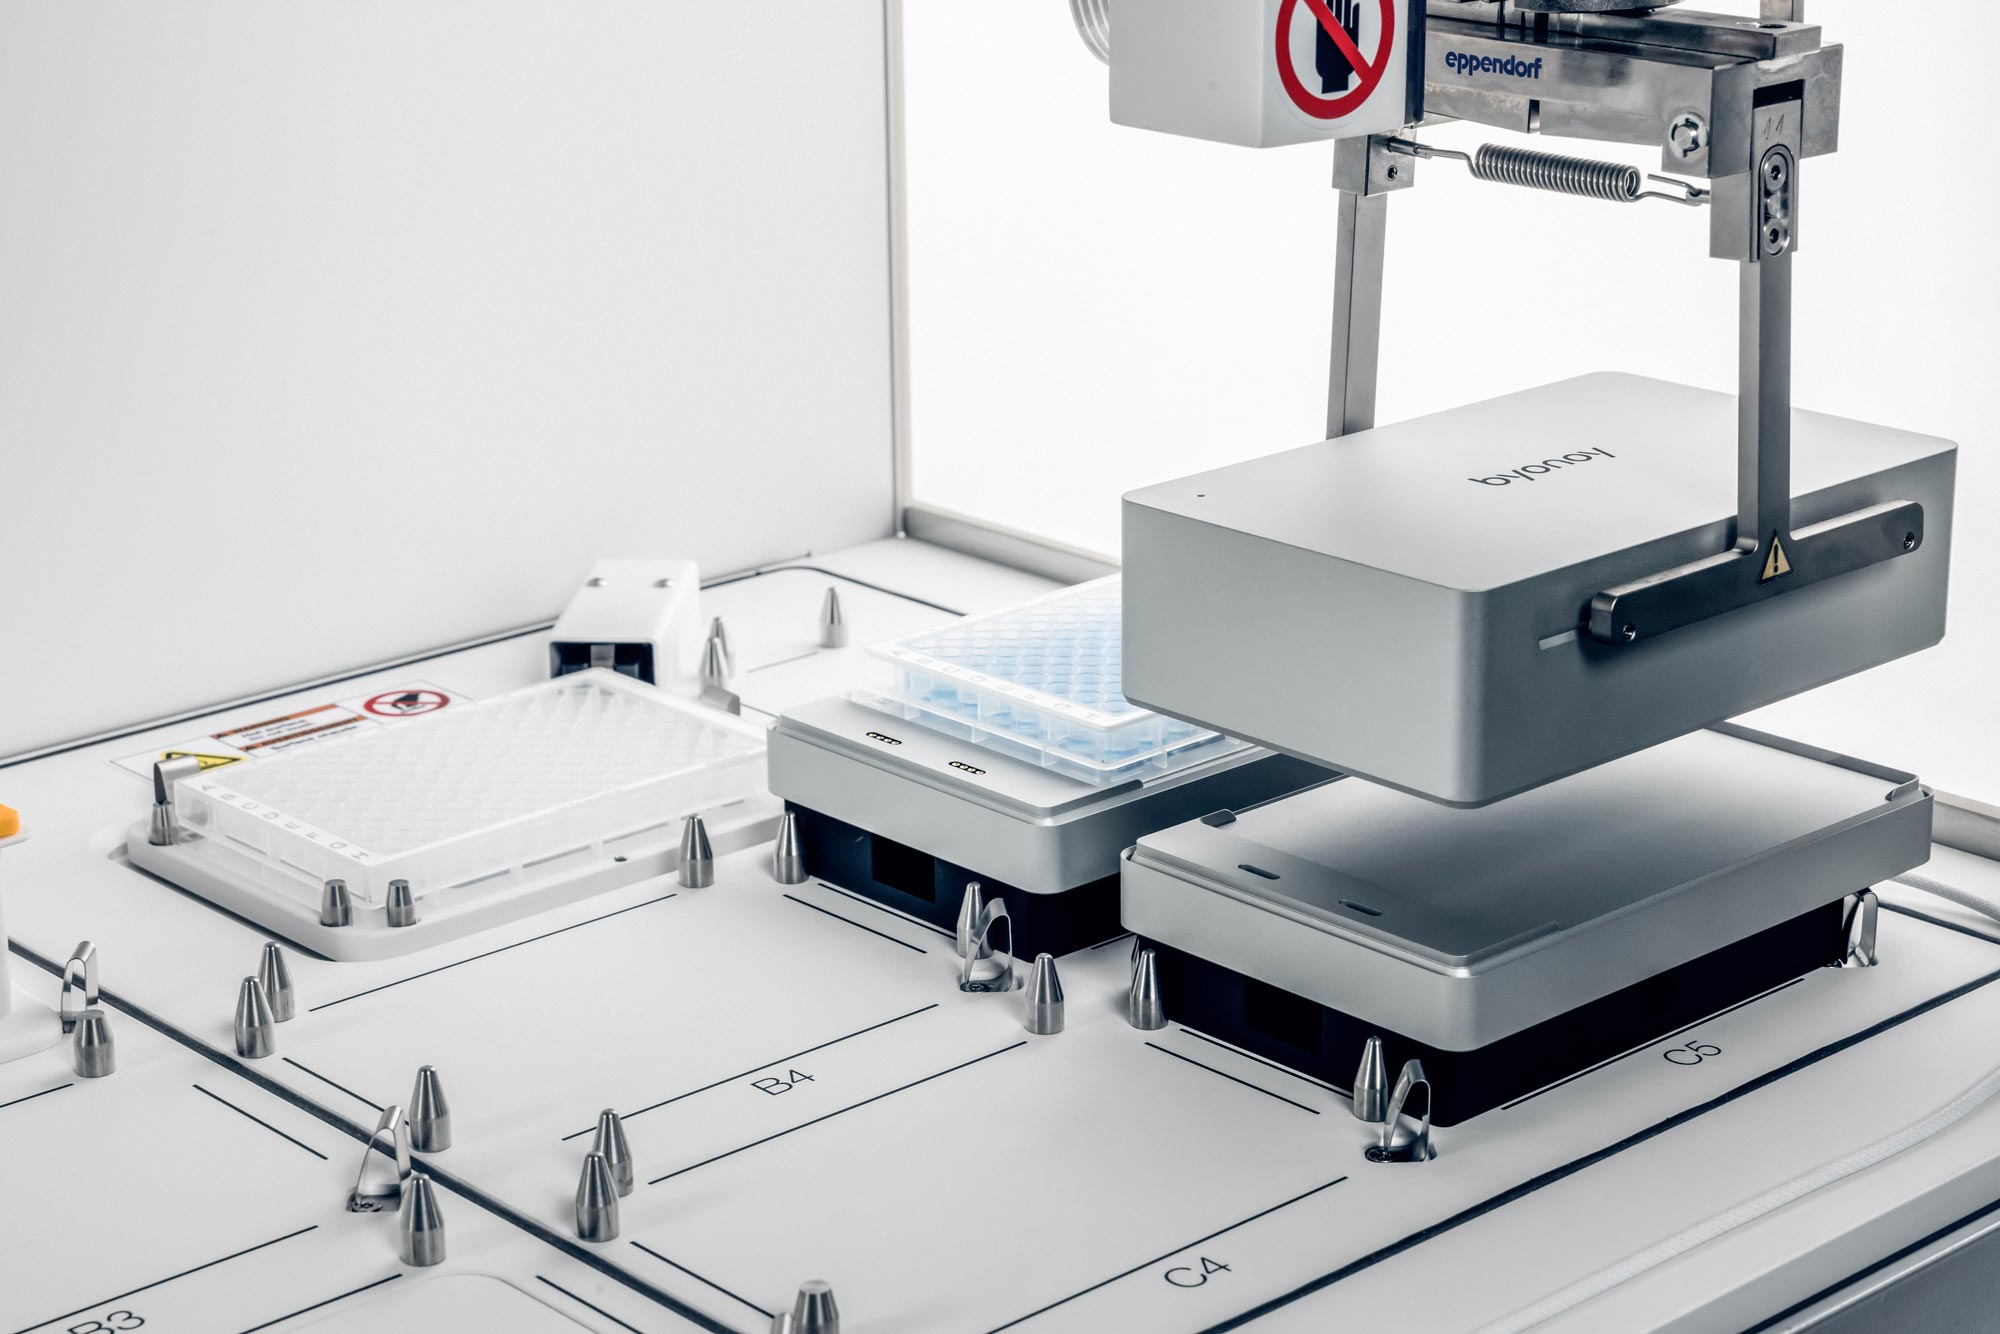  Lab Automation with integrated detection method unleashes new applications Byonoy